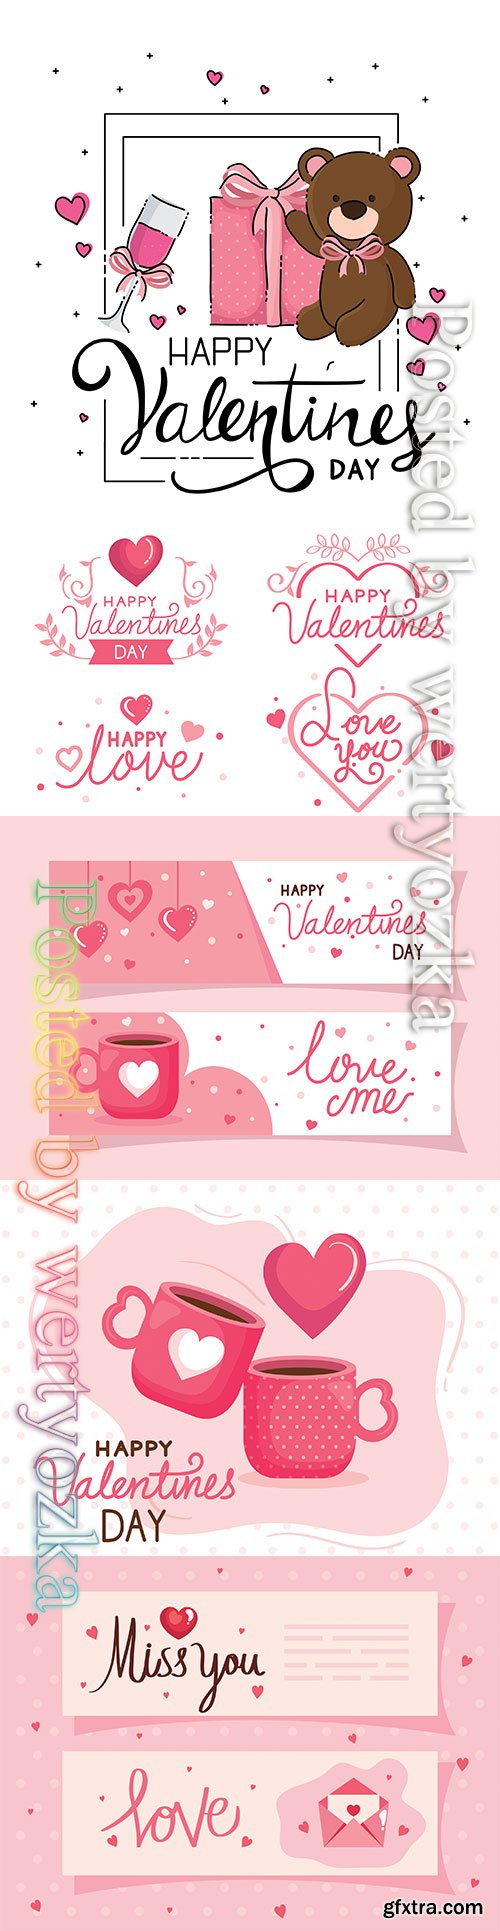 Vector cards of happy valentines day